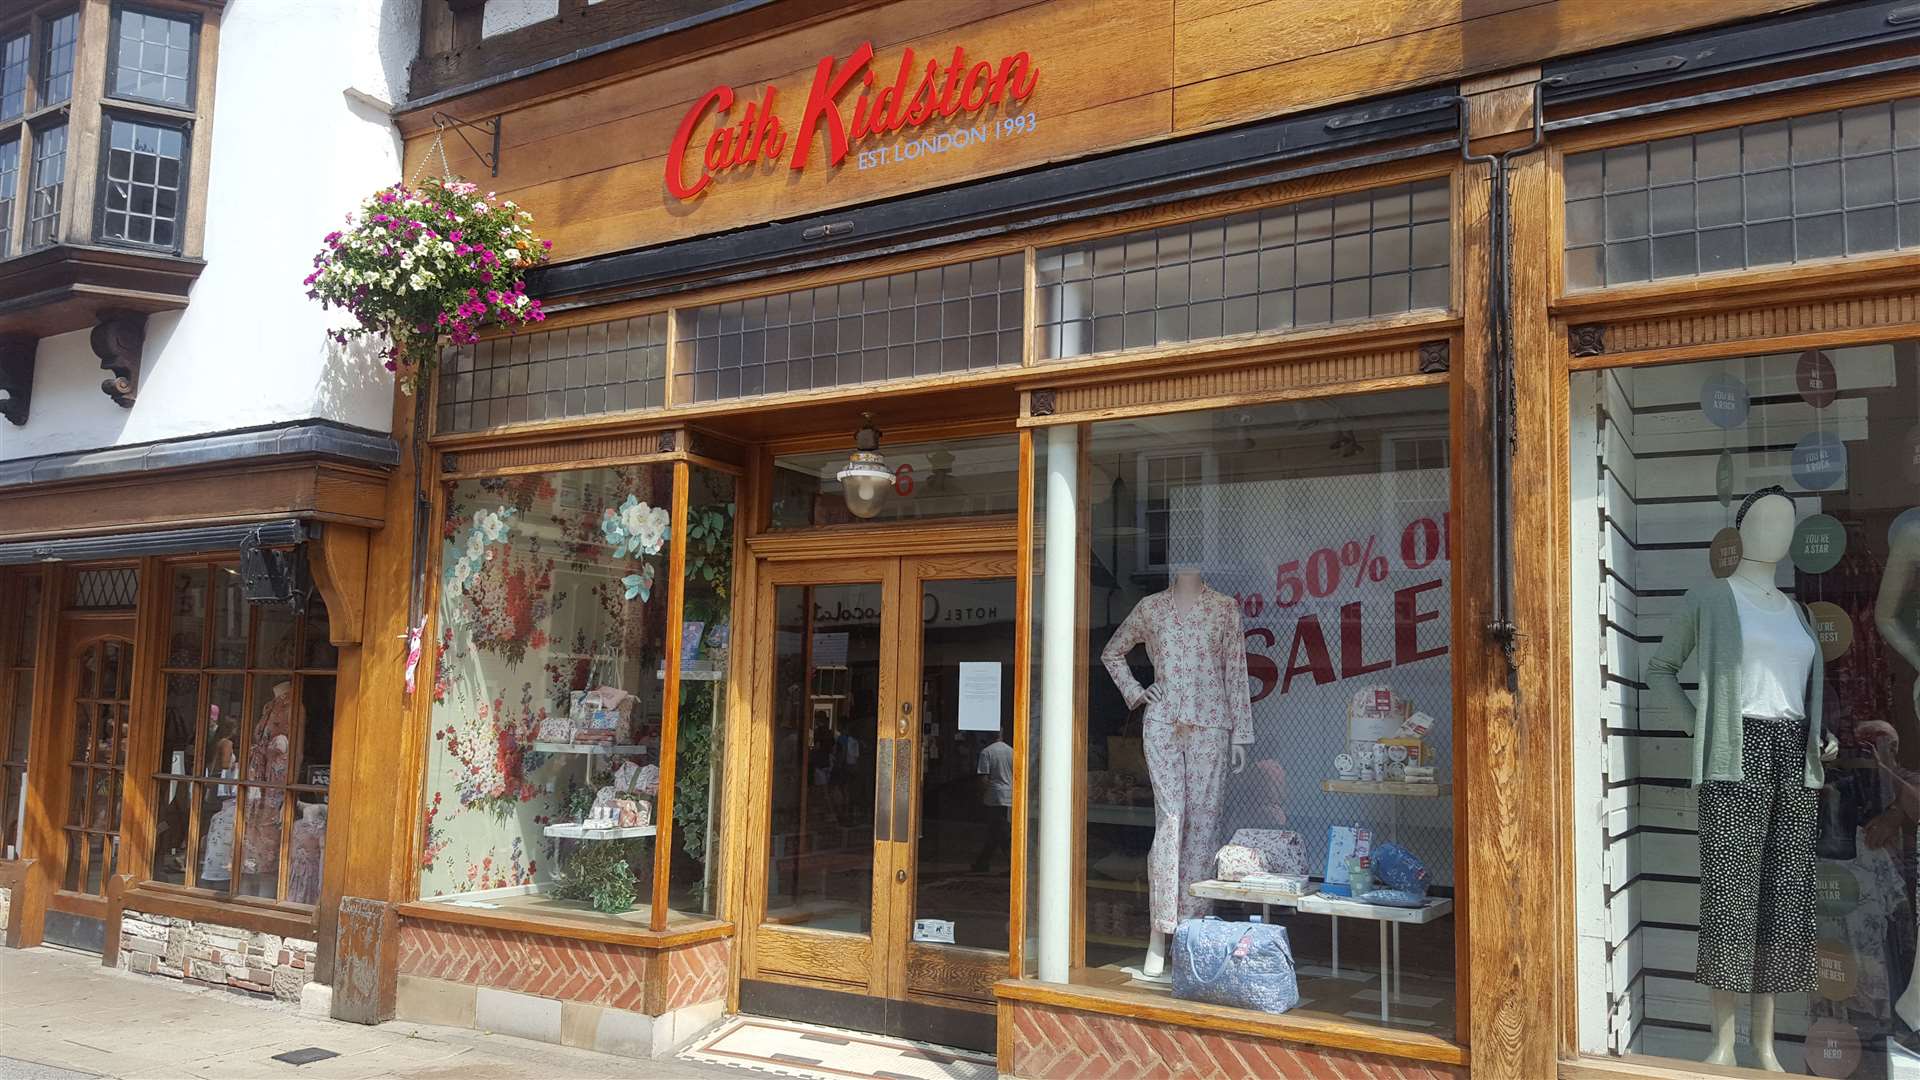 Cath Kidston in Canterbury has closed down